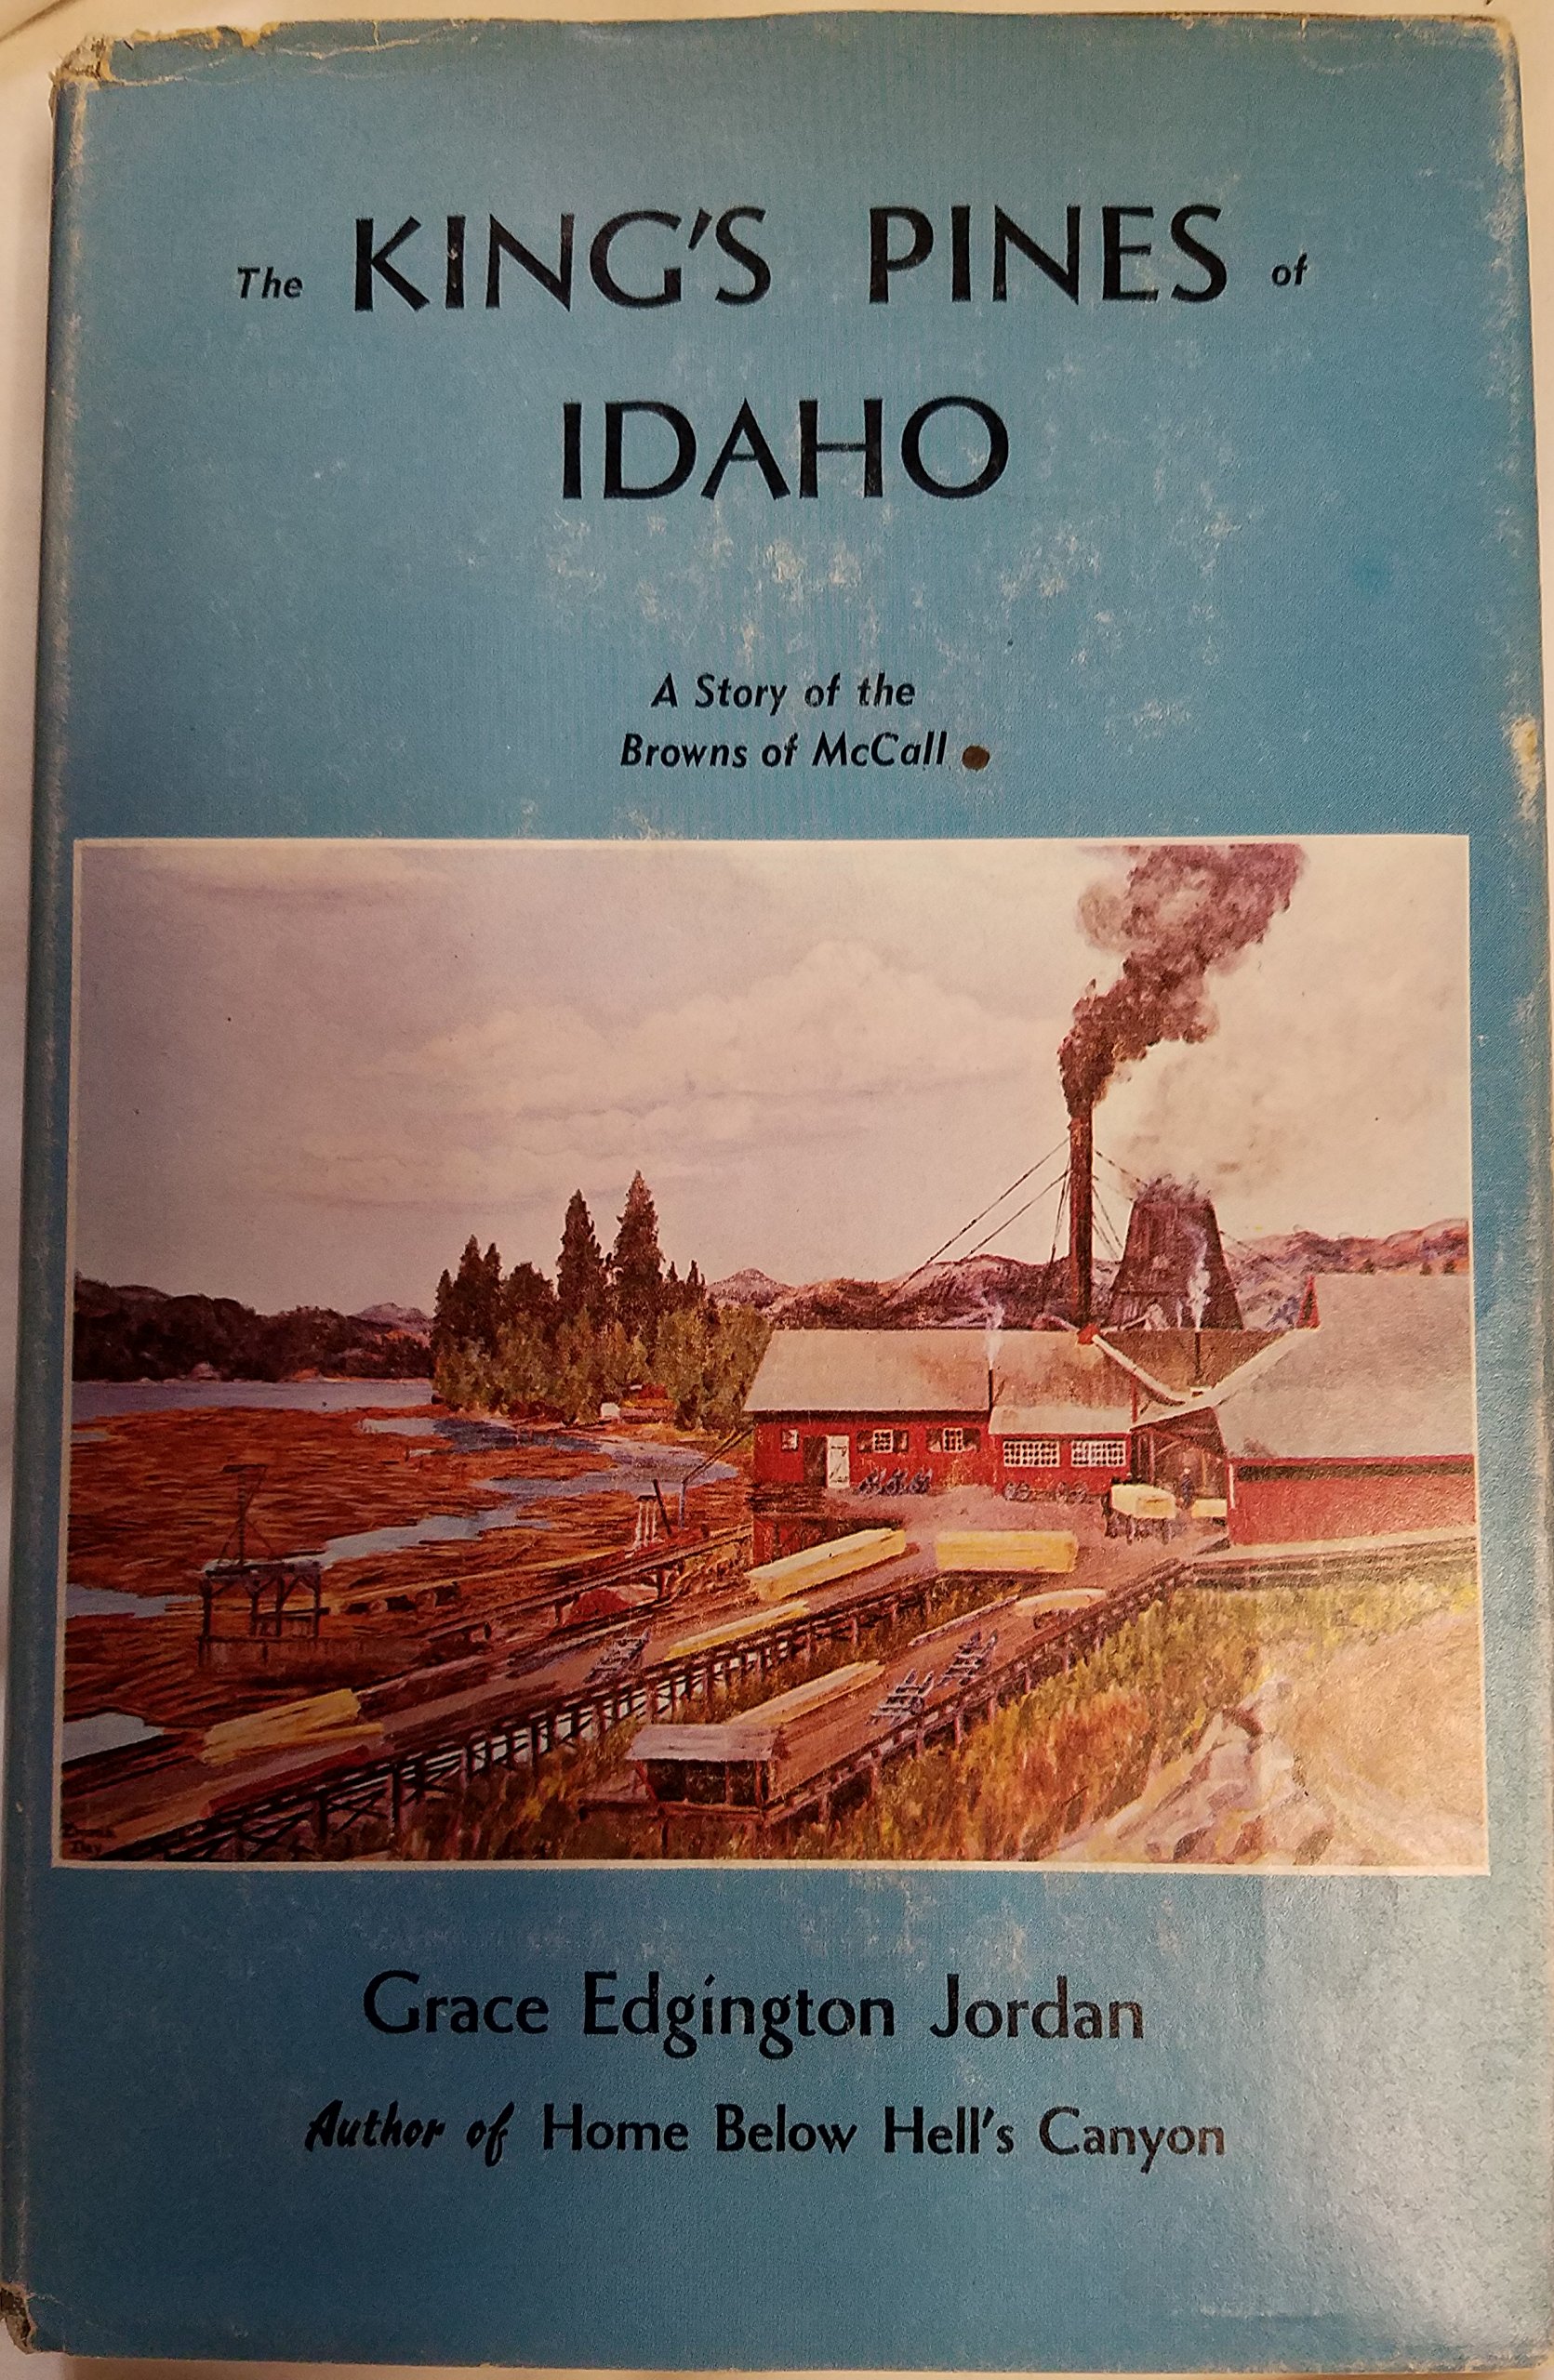 The king's pines of Idaho: A story of the Browns of McCall (book cover)